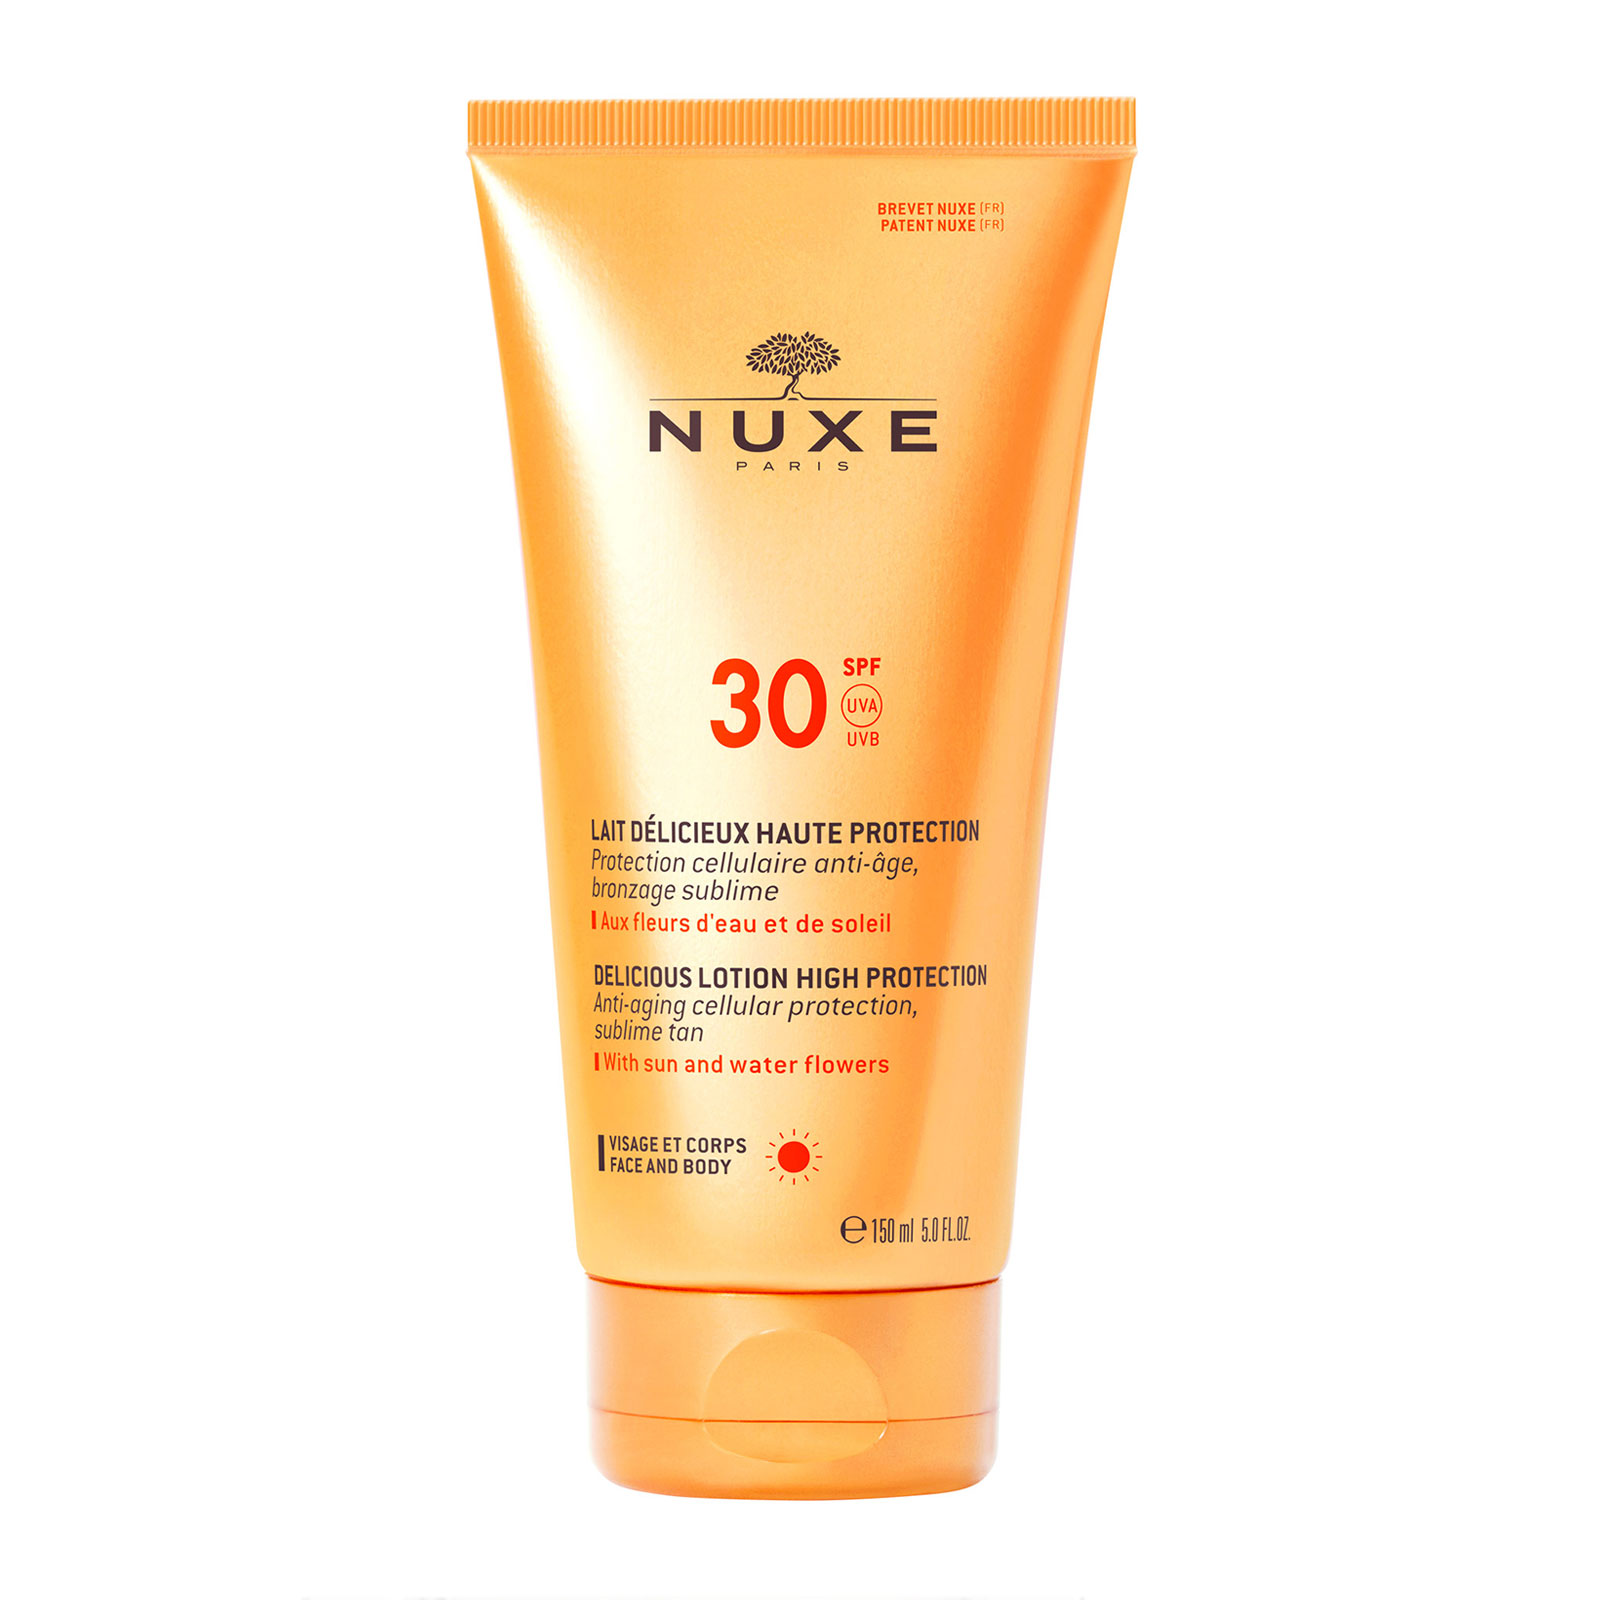 Nuxe Sun Lait Delicieux Haute Protection Delicious Lotion High Protection Spf30 150Ml